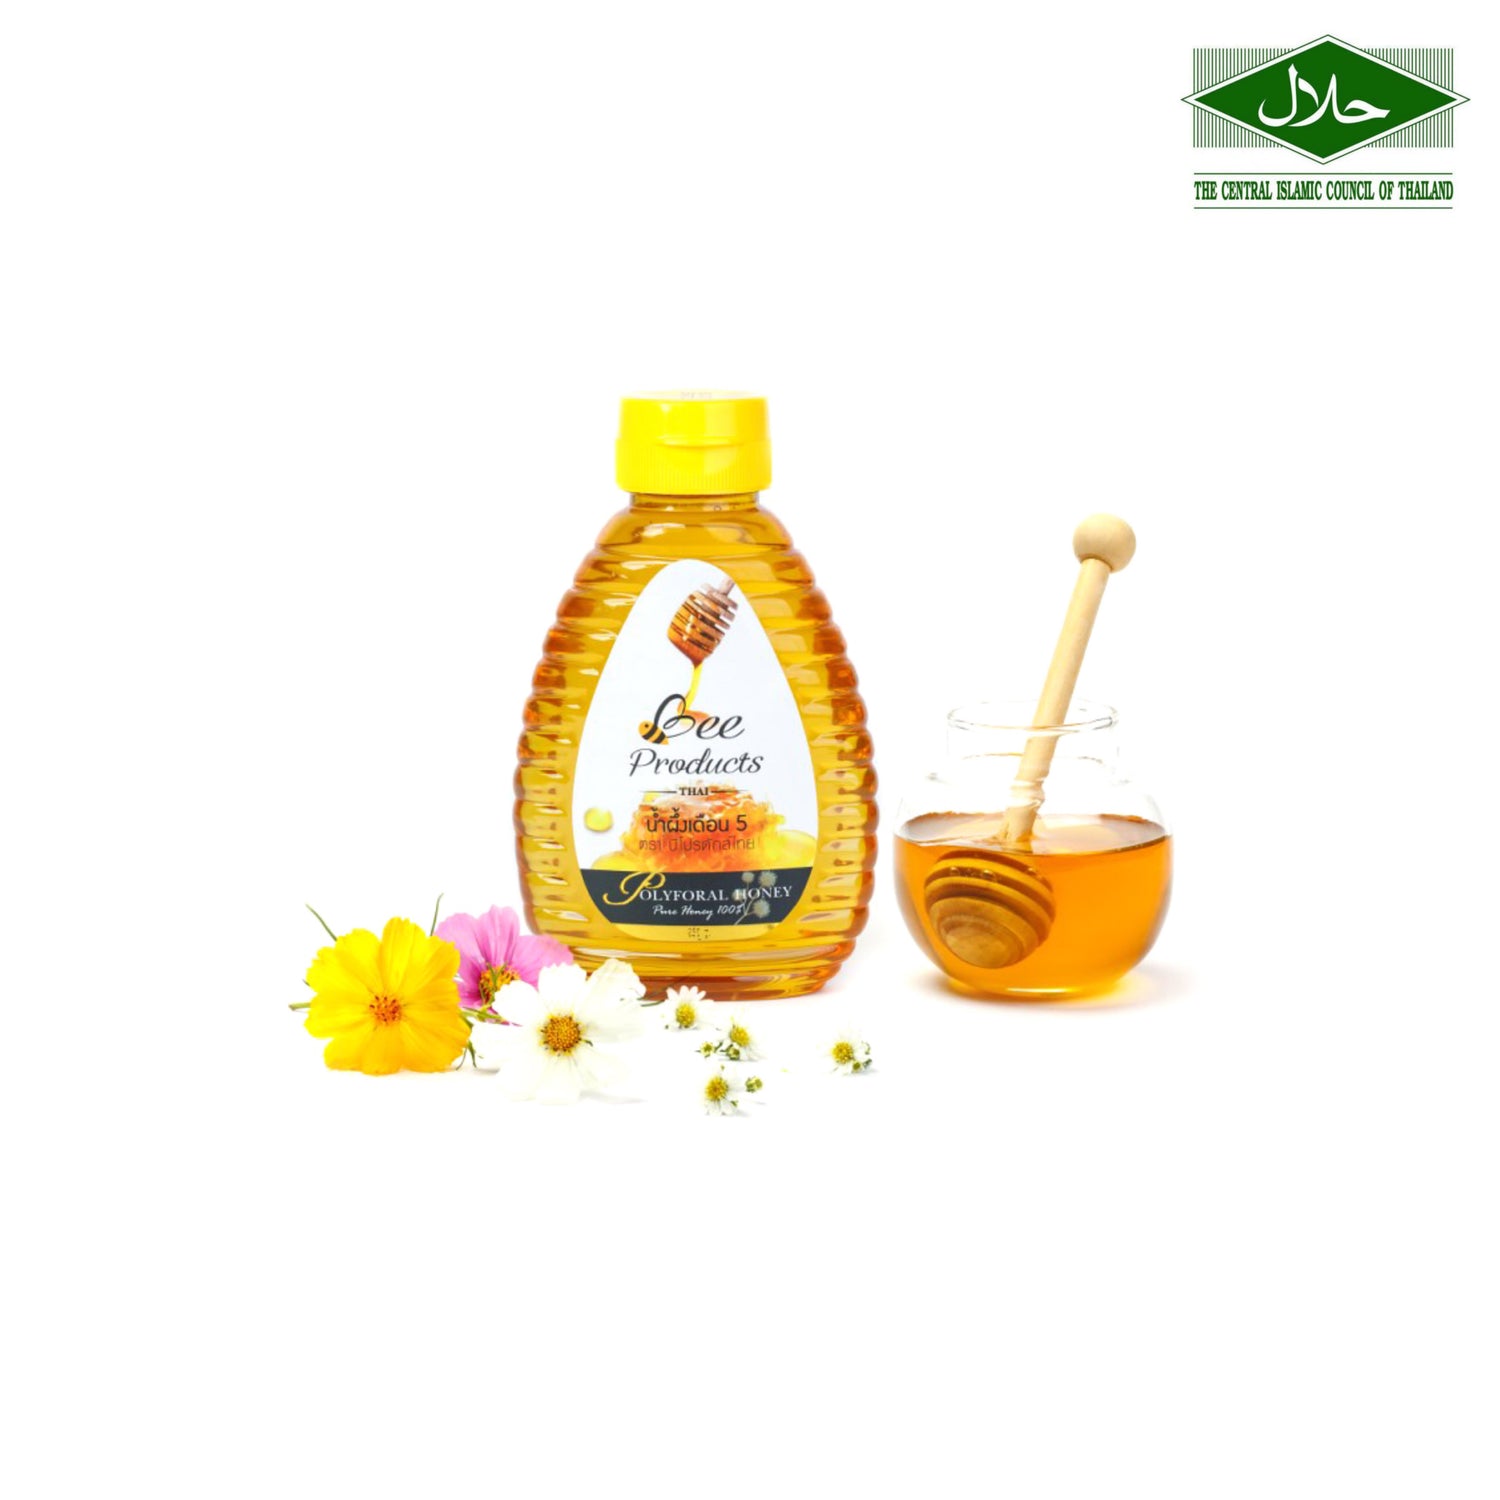 Bee Product Polyforal Honey 250g